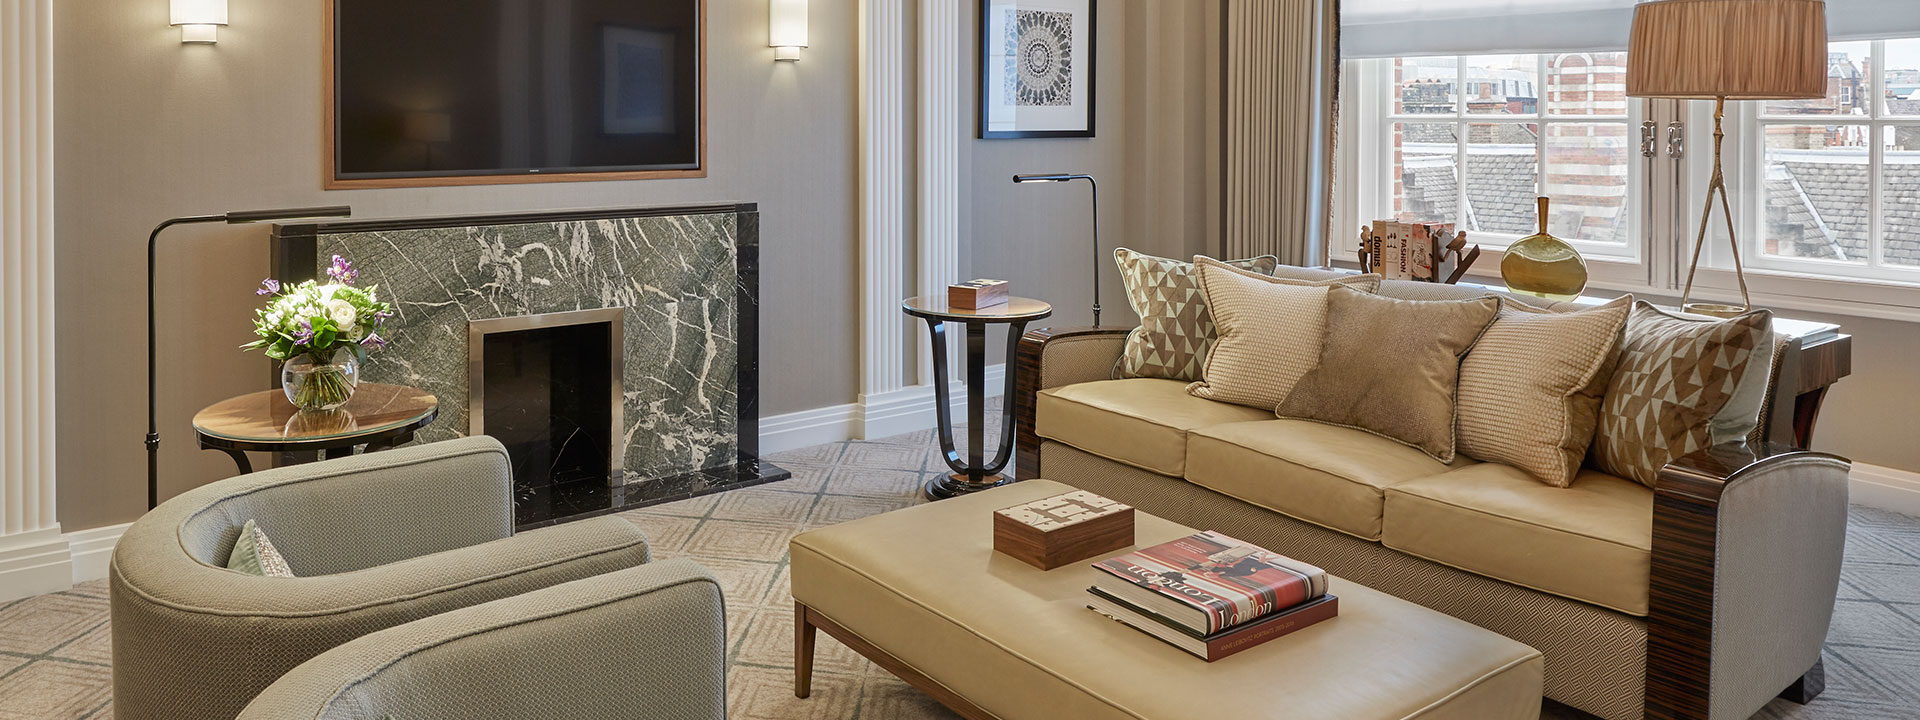 Sitting room in Claridge's Suite with comfortable furniture including an ornate fireplace.